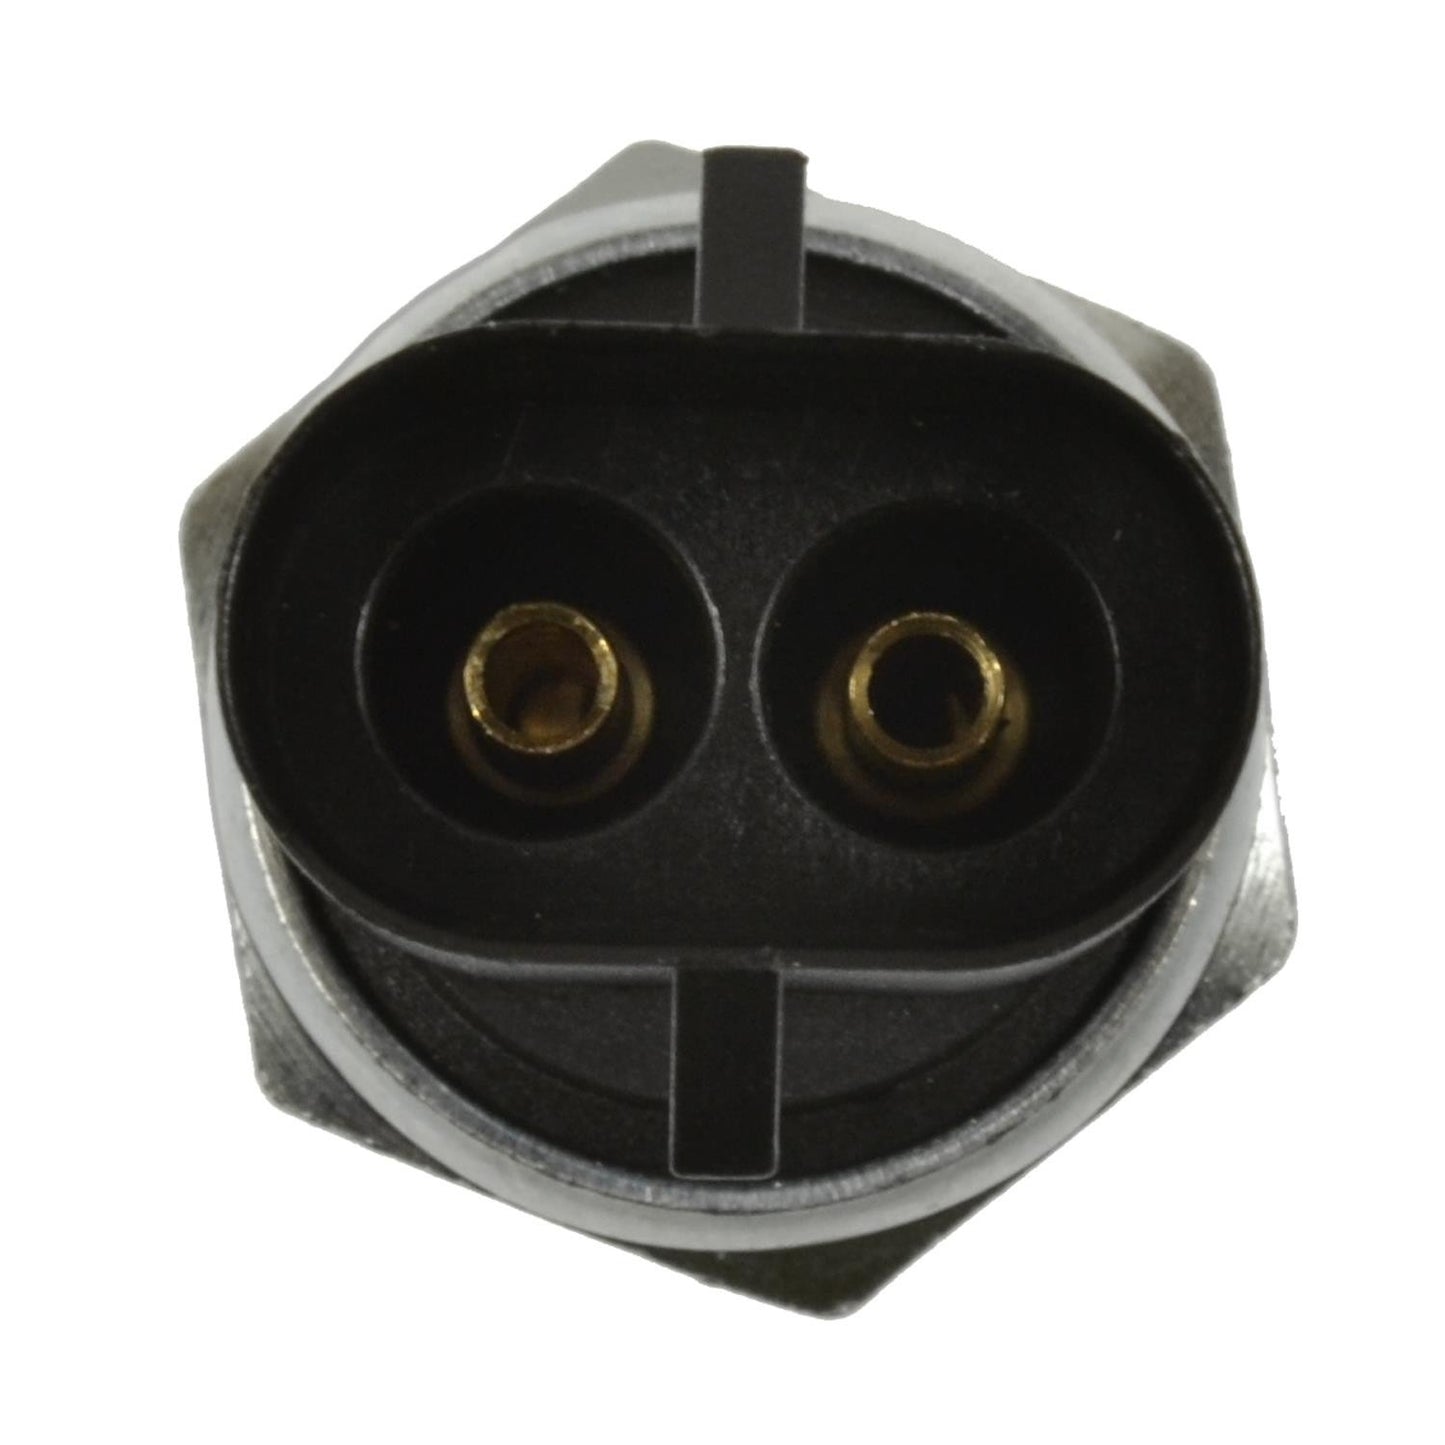 Other View of 4WD Indicator Light Switch STANDARD IGNITION TCA-8